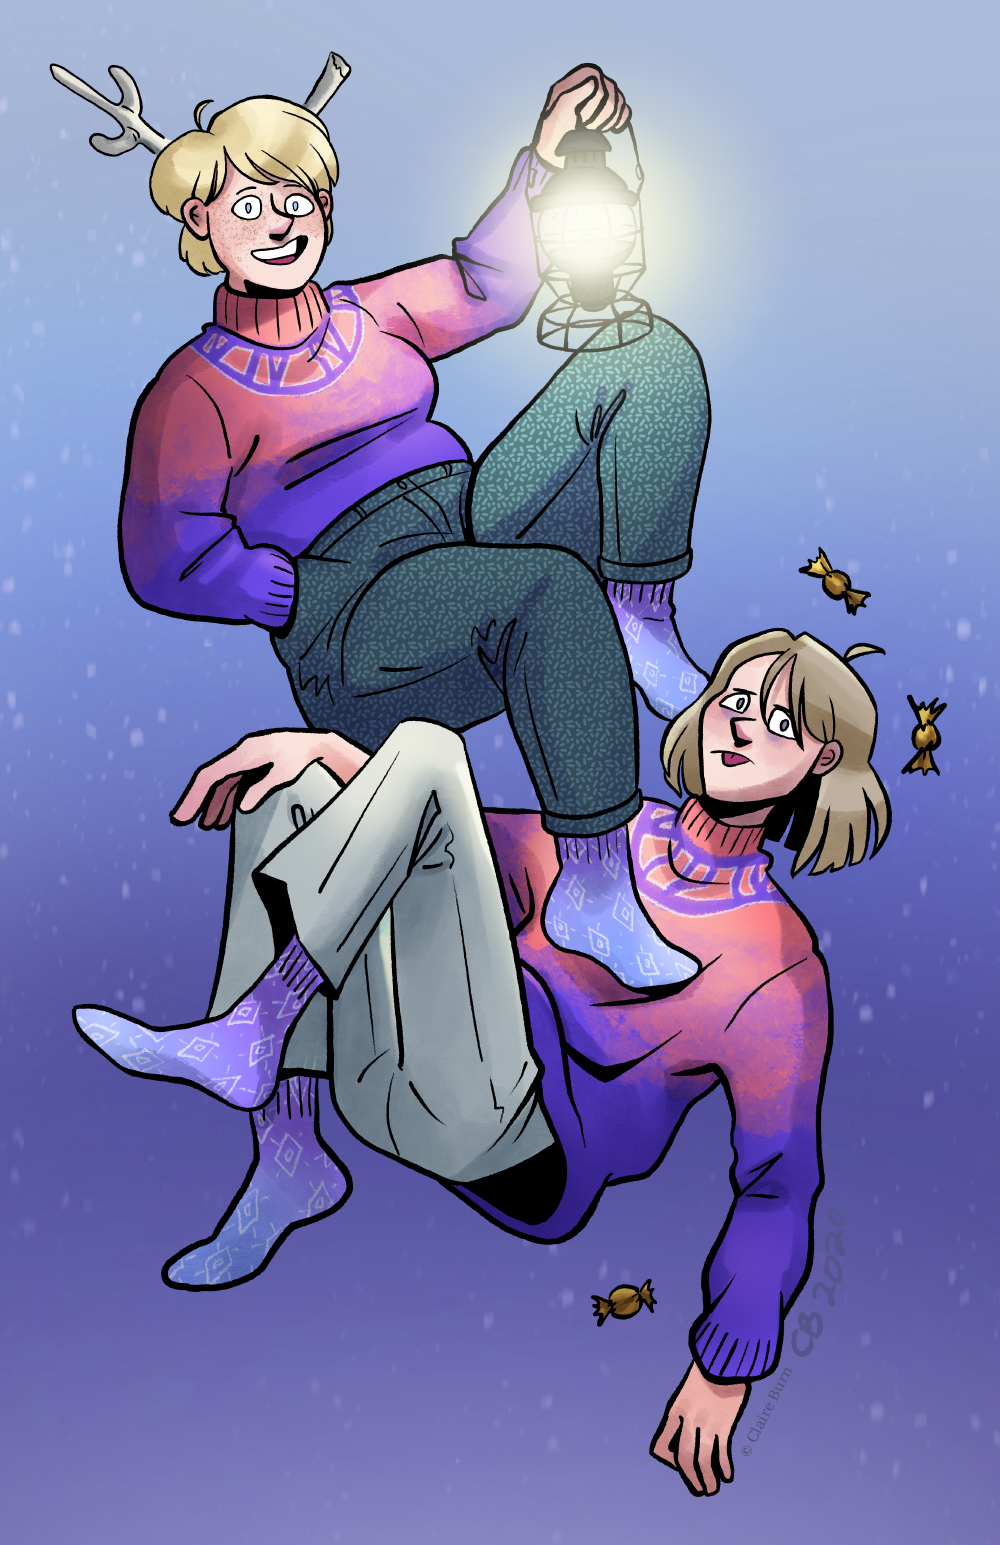 Freya and Corin are sitting/floating in front of a purple/blue gradient background. Freya, holding a lantern, is happy, while Corin, whom Freya is stepping on, is displeased.